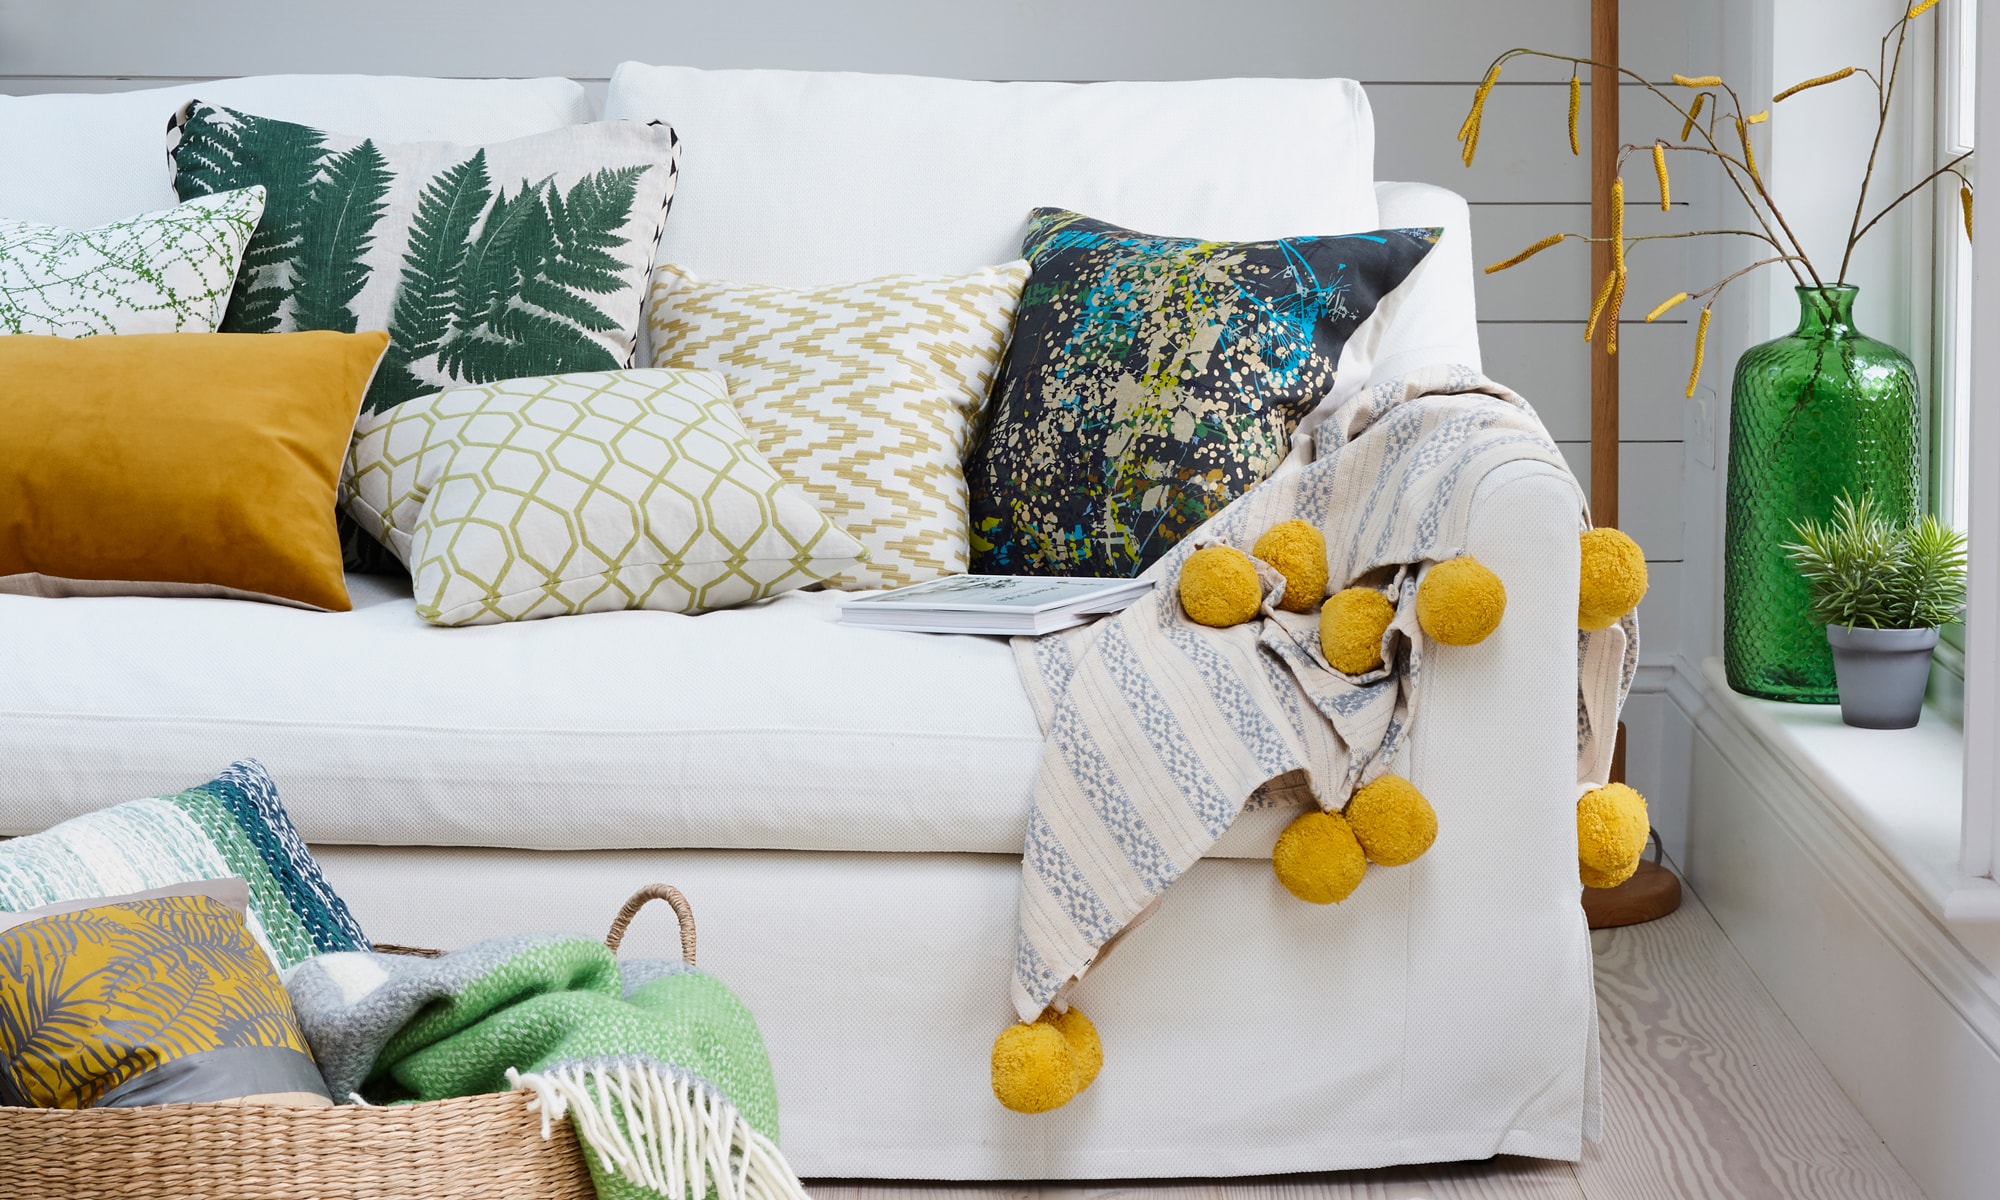 The 5 best summer home decor ideas for 2019